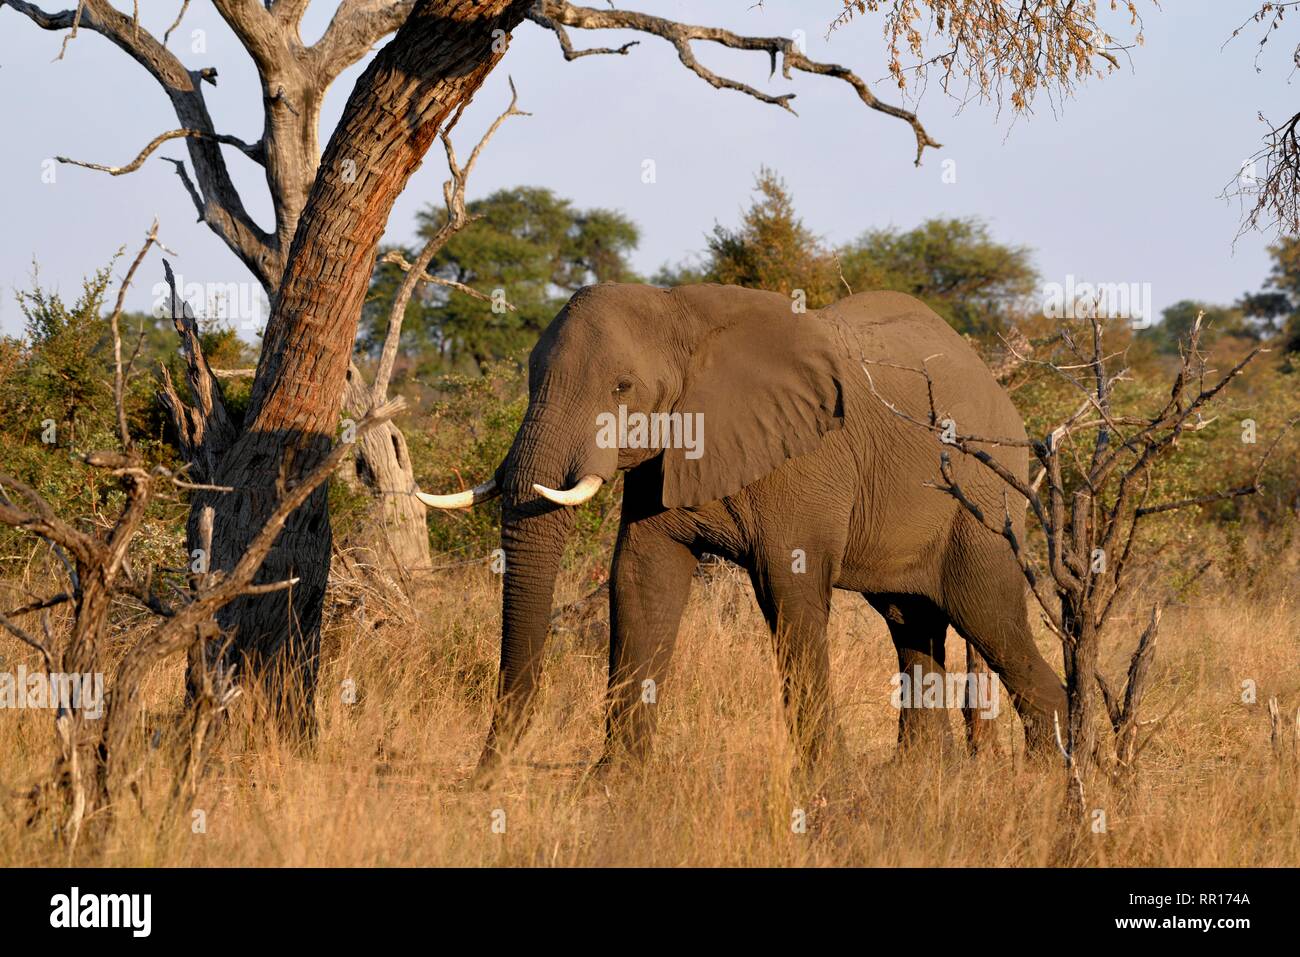 zoology, mammal (mammalia), African elephant (Loxodonta africana), Bwabwata national Park, Caprivi Str, Additional-Rights-Clearance-Info-Not-Available Stock Photo